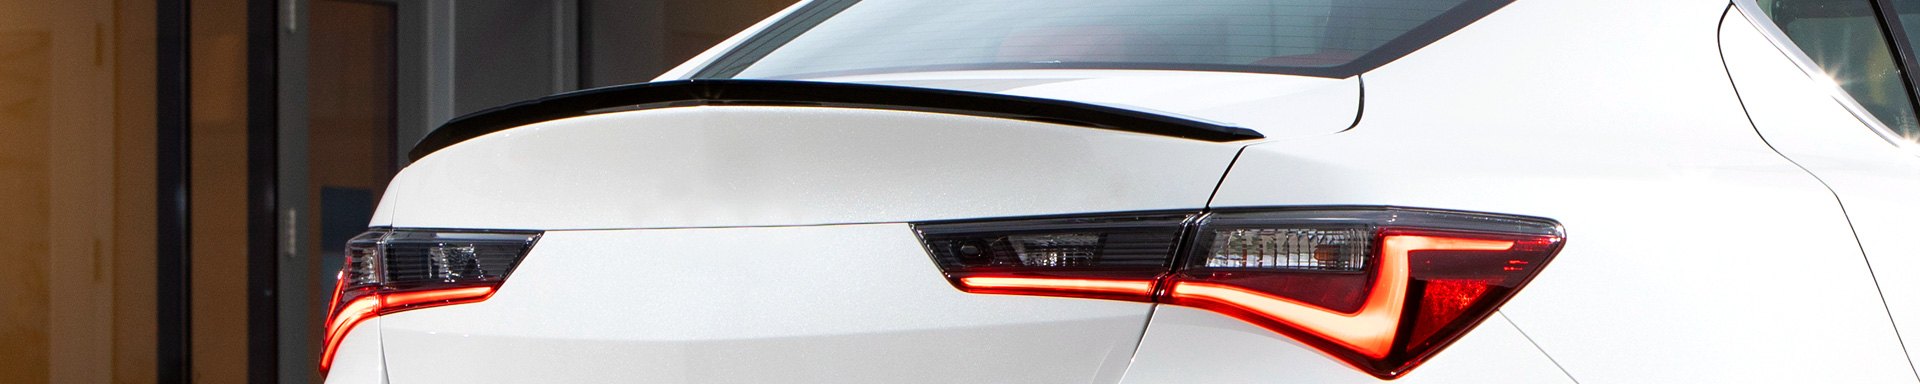 Keep It Simple: First Look At 2019-2020 Acura ILX Factory Style Spoilers by T5i